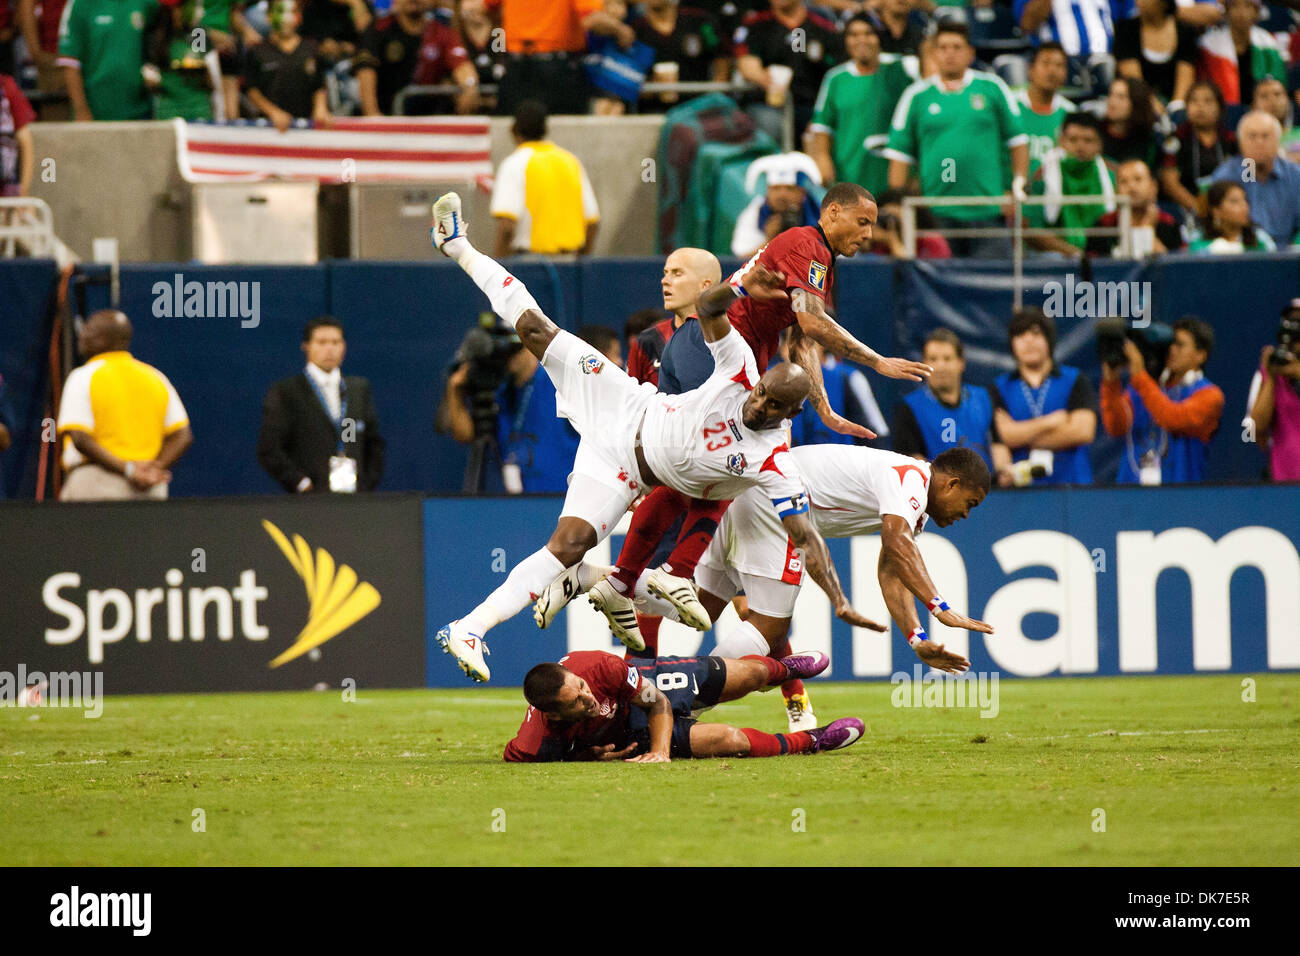 June 22, 2011 - Houston, Texas, U.S - Panama Soccer Team Defender Felipe Baloy (23), United States Soccer Team Midfielder Clint Dempsey (8), and other pile in one to get the ball. USA defeated Panama 1-0. (Credit Image: © Juan DeLeon/Southcreek Global/ZUMAPRESS.com) Stock Photo